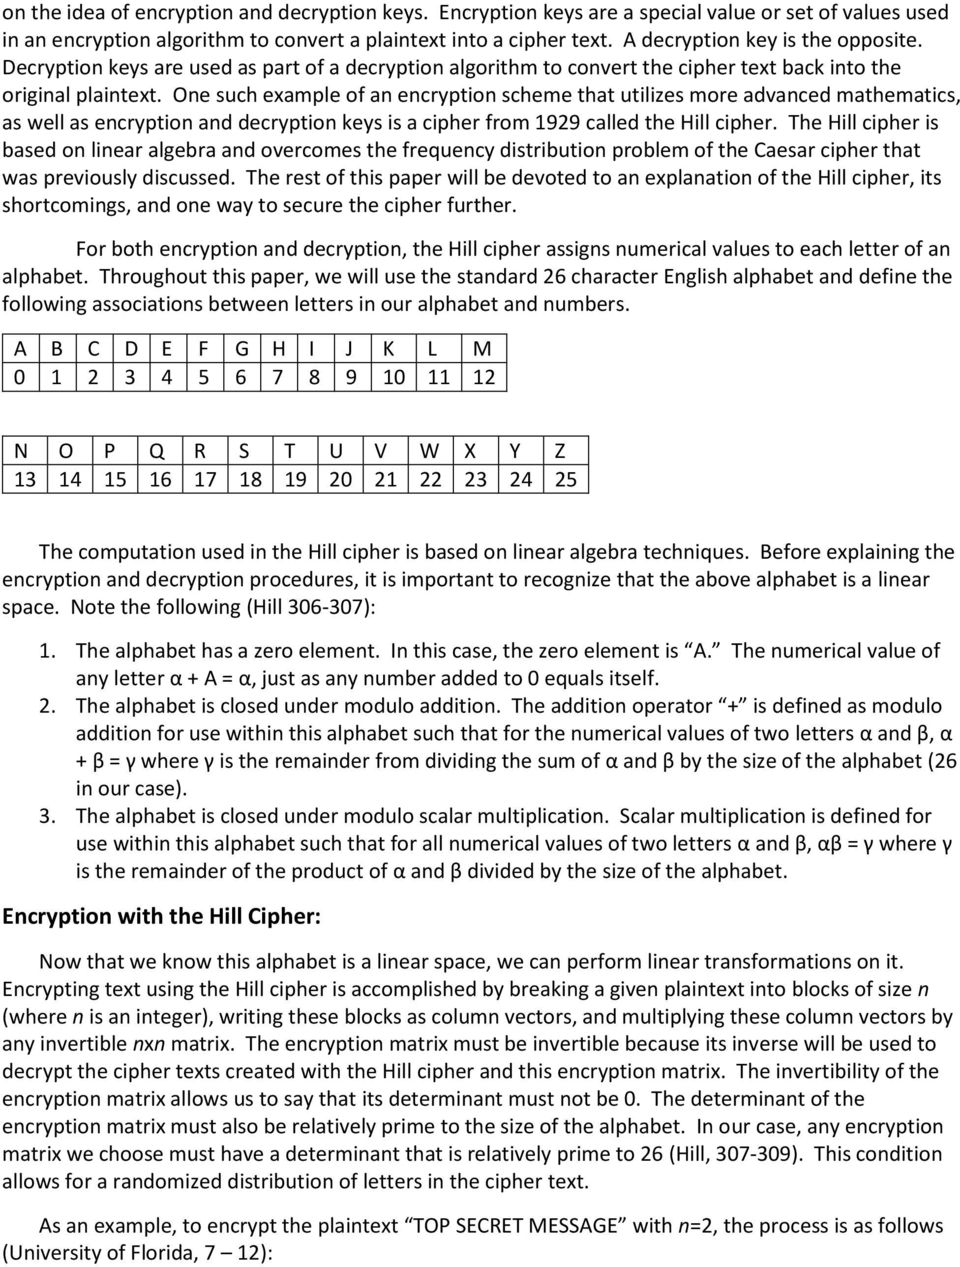 One such example of an encryption scheme that utilizes more advanced mathematics, as well as encryption and decryption keys is a cipher from 1929 called the Hill cipher.